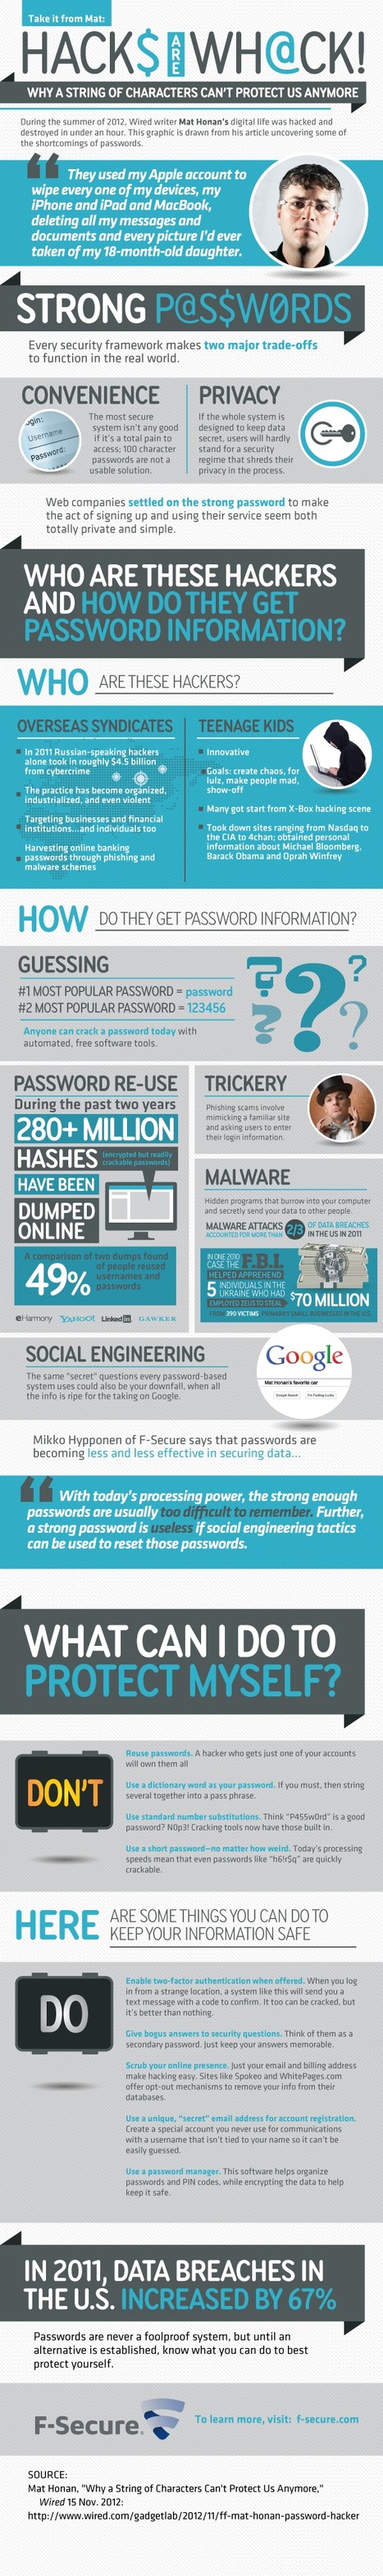 Hacking lessons learned: how to cover your digital ass [Infographic] | Digital Collaboration and the 21st C. | Scoop.it